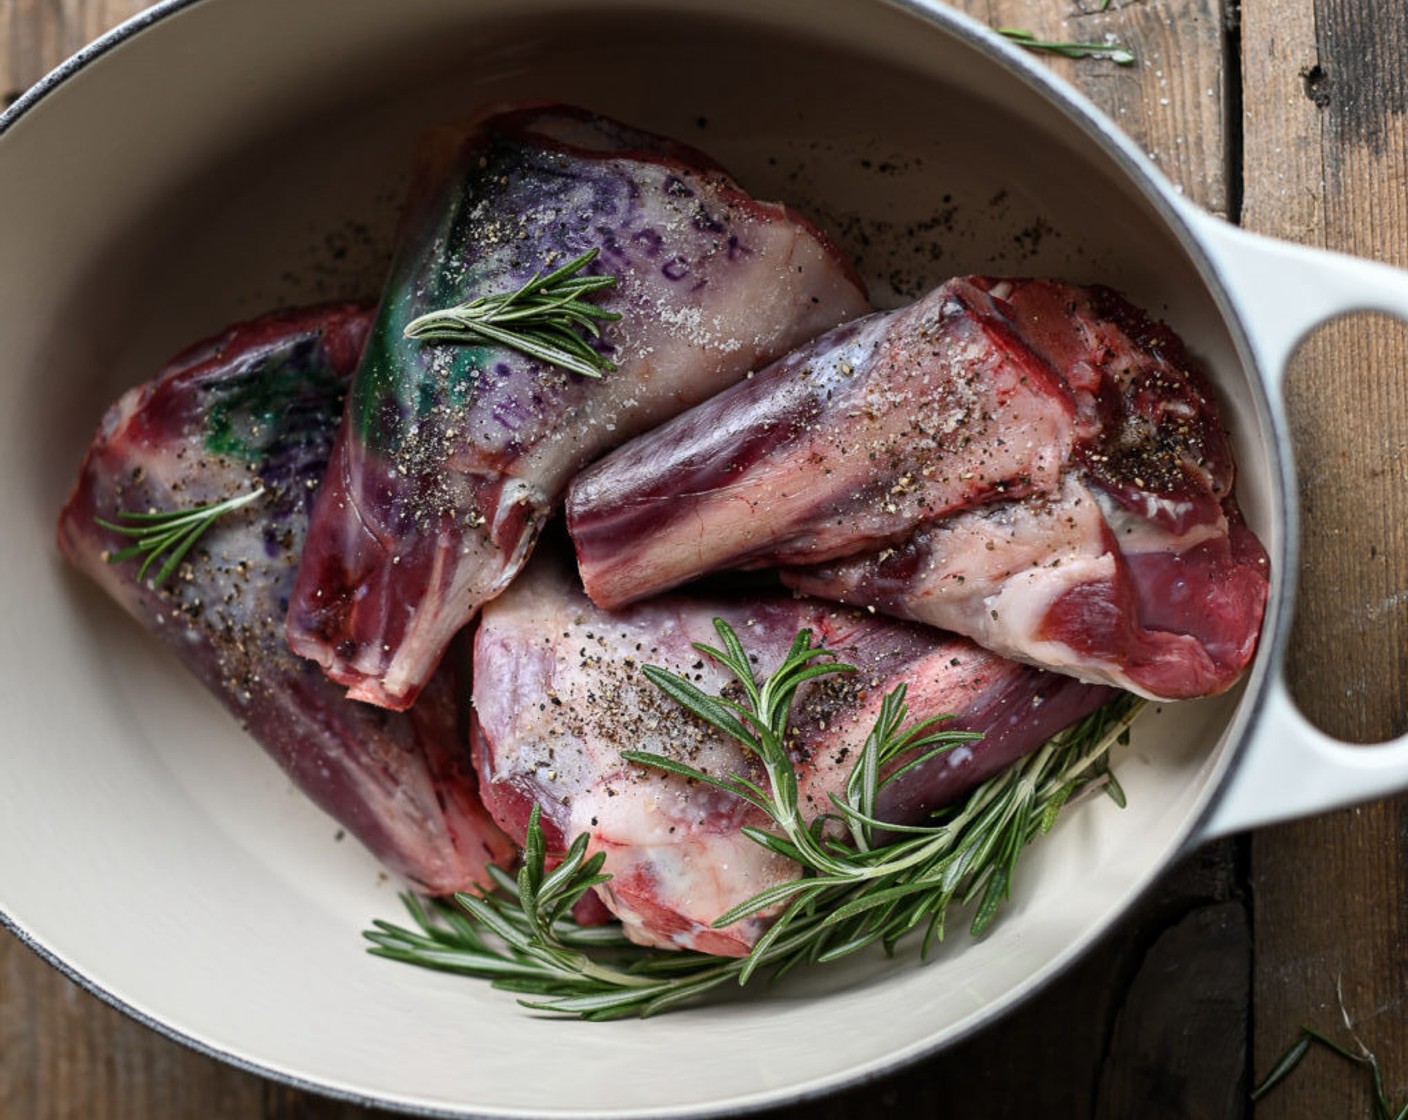 step 2 Using a large casserole, heat the Olive Oil (as needed), add in Fresh Rosemary (2 sprigs), and brown the Lamb Shanks (4), careful to color each side of the meat. Remove the shanks and rosemary and set them aside.